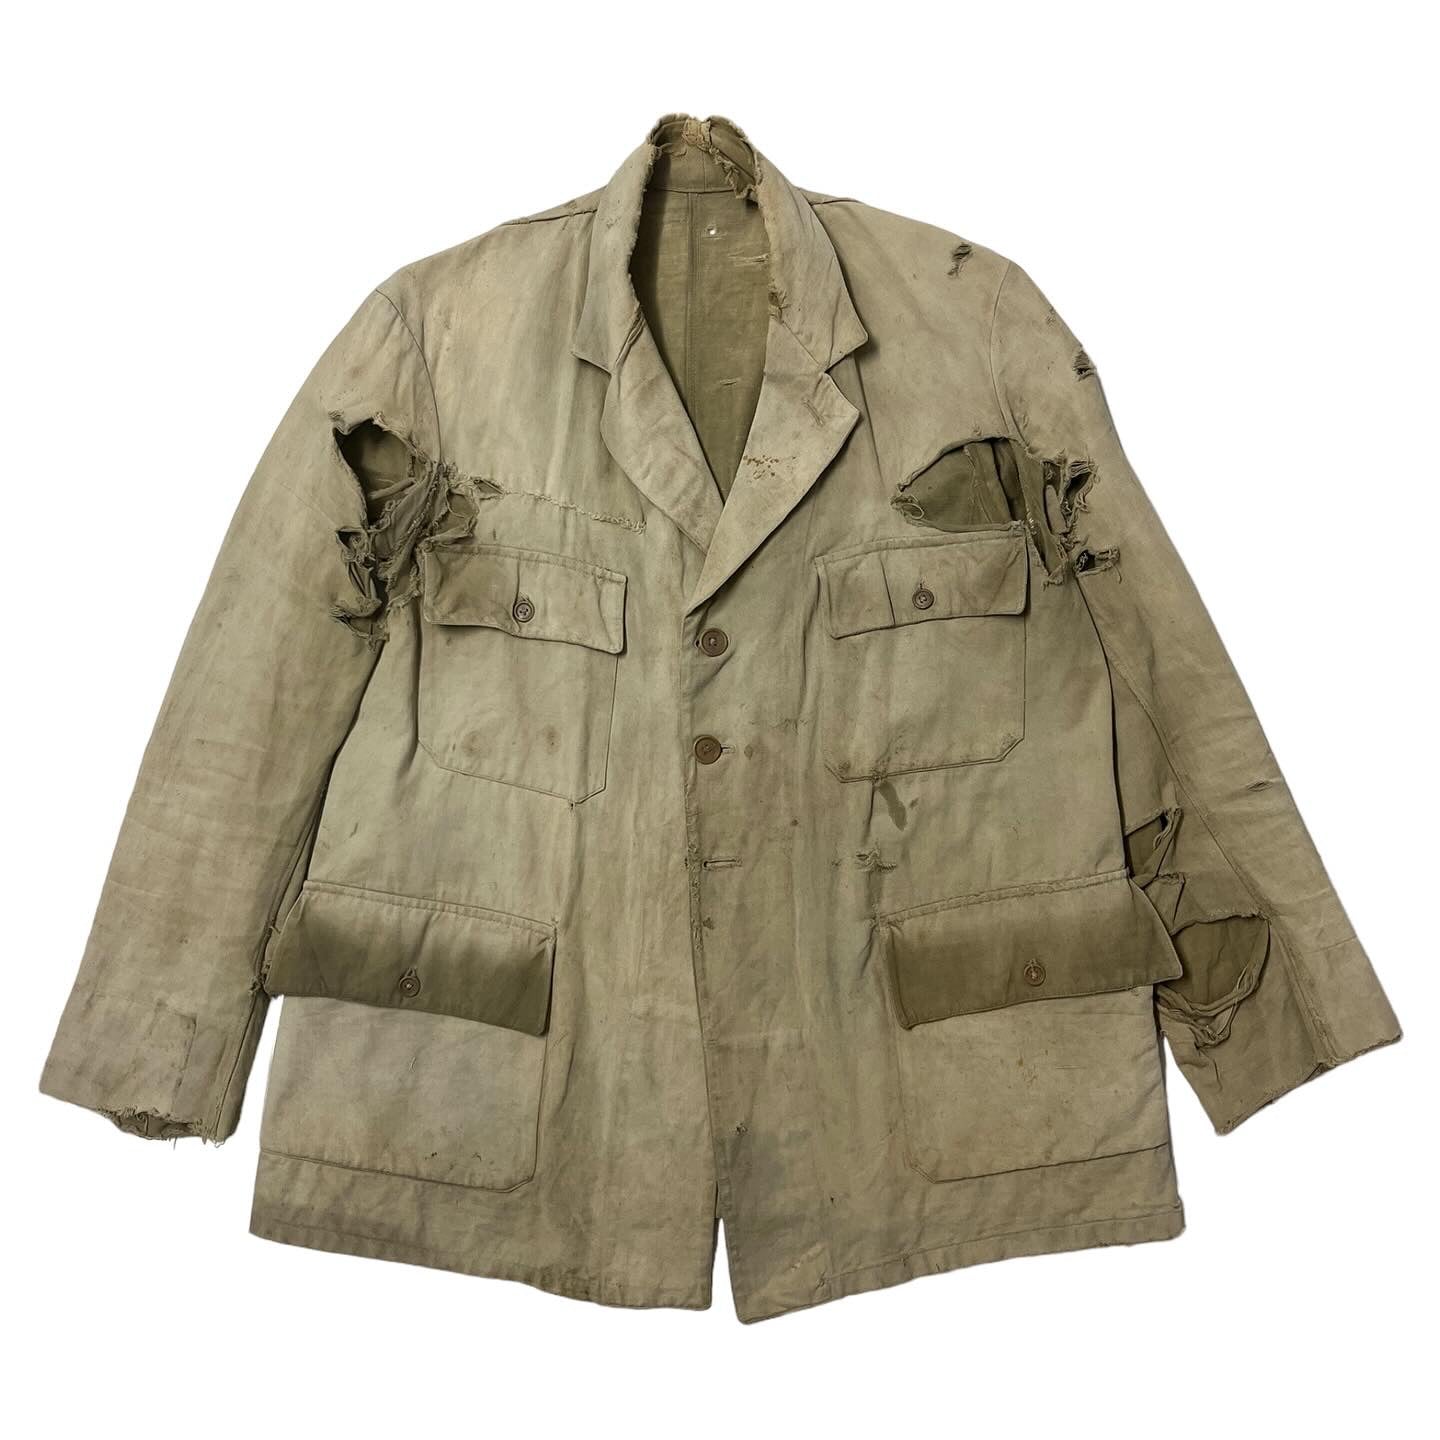 1910s/20s French Cotton/Linen Hunting Jacket - Faded Khaki - M